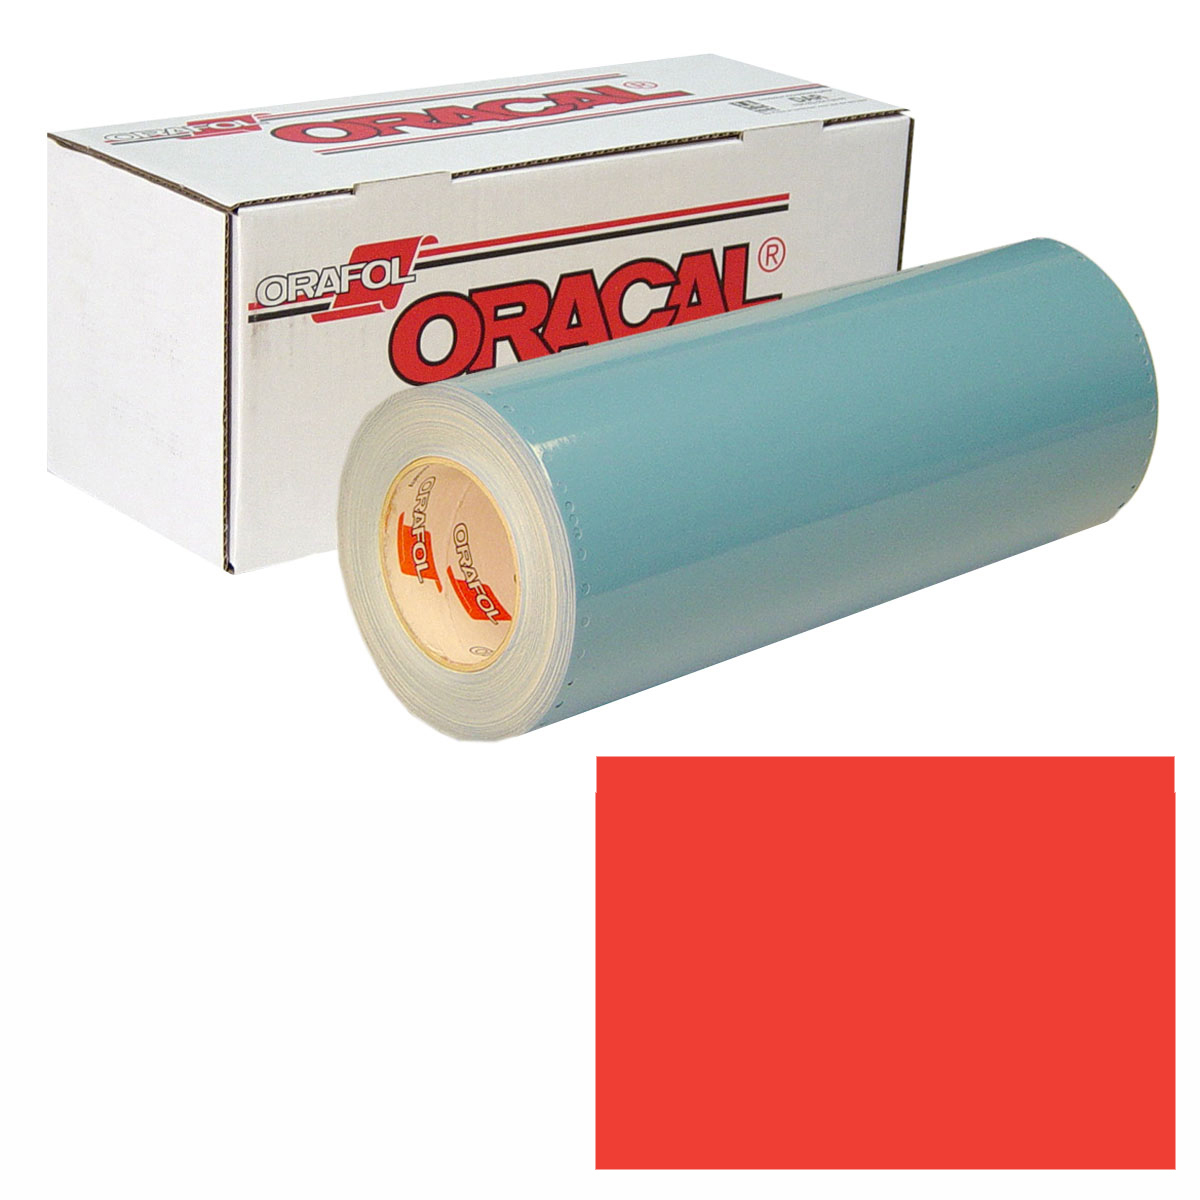 ORACAL 751 30in X 50yd 326 Signal Red